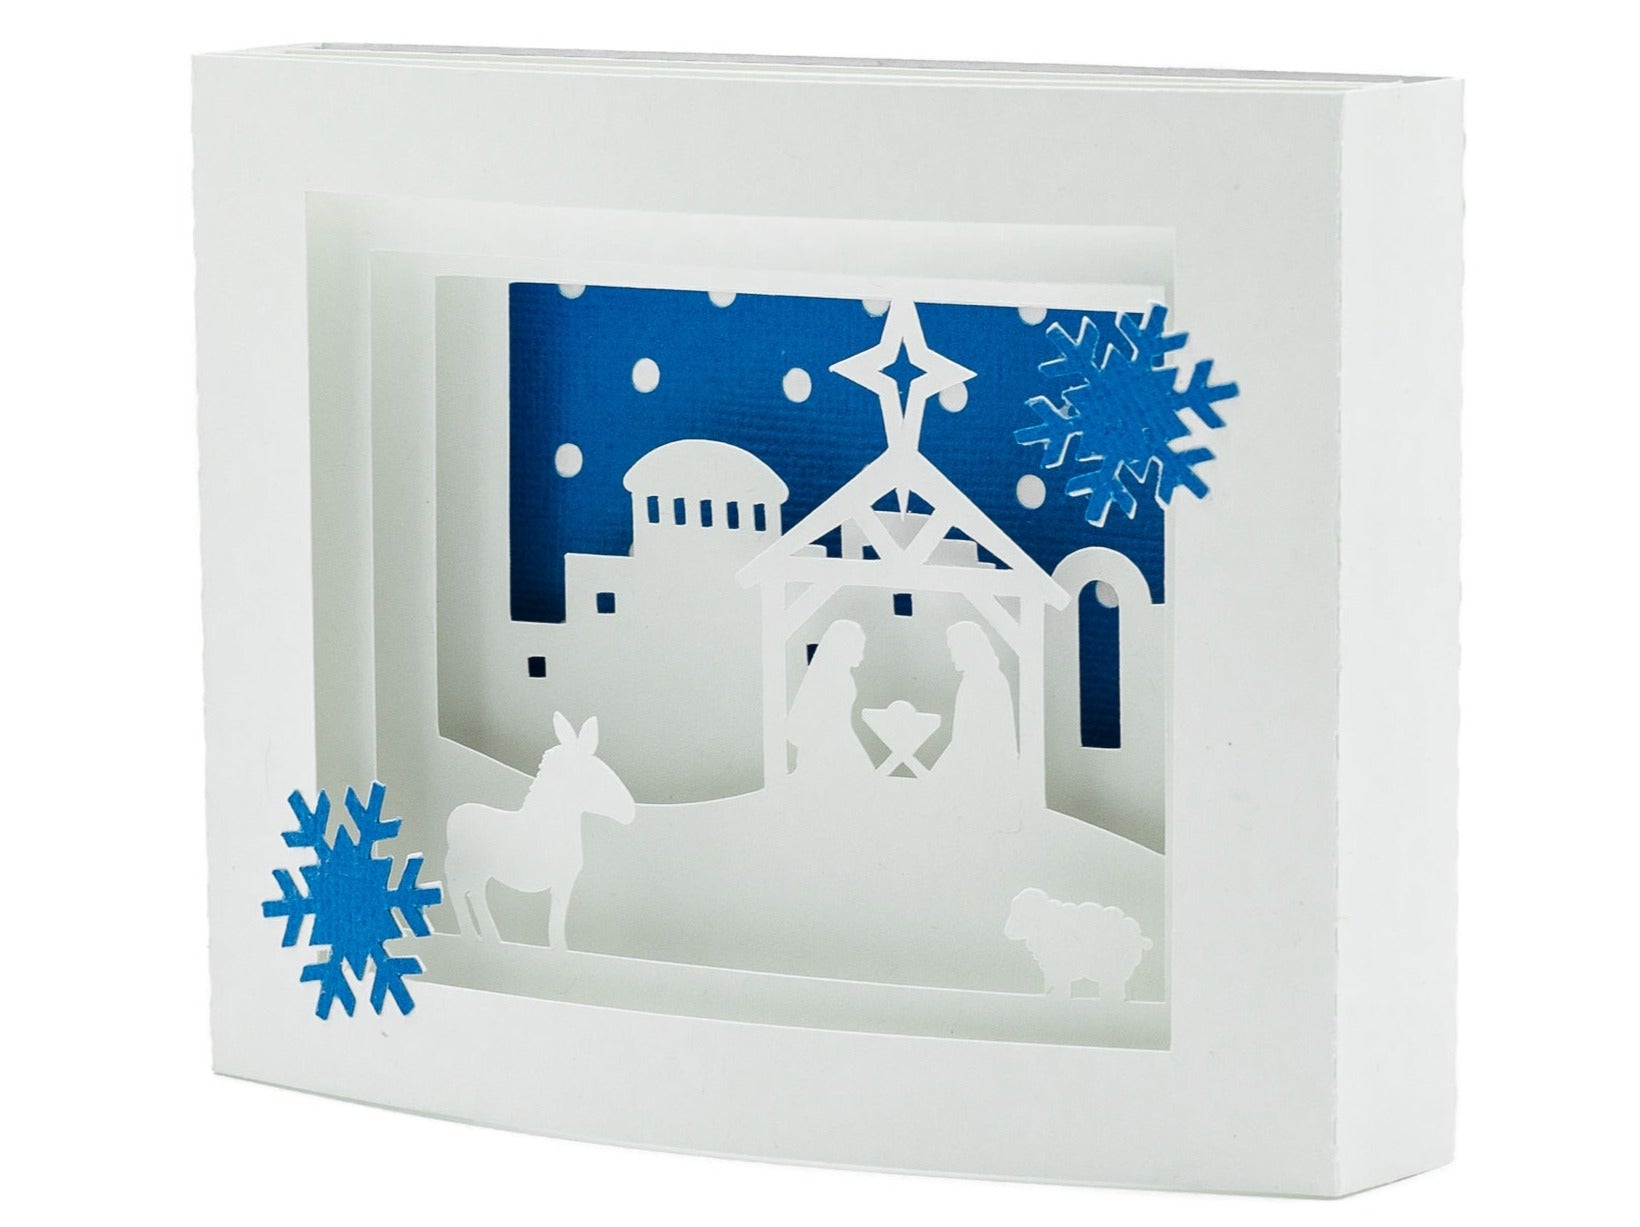 Nativity Scene Shadow Box Pop Up Card | 3D Greeting Card | Silent Night Christmas Card | Holy Family In Jerusalem Decor | Holiday Gift